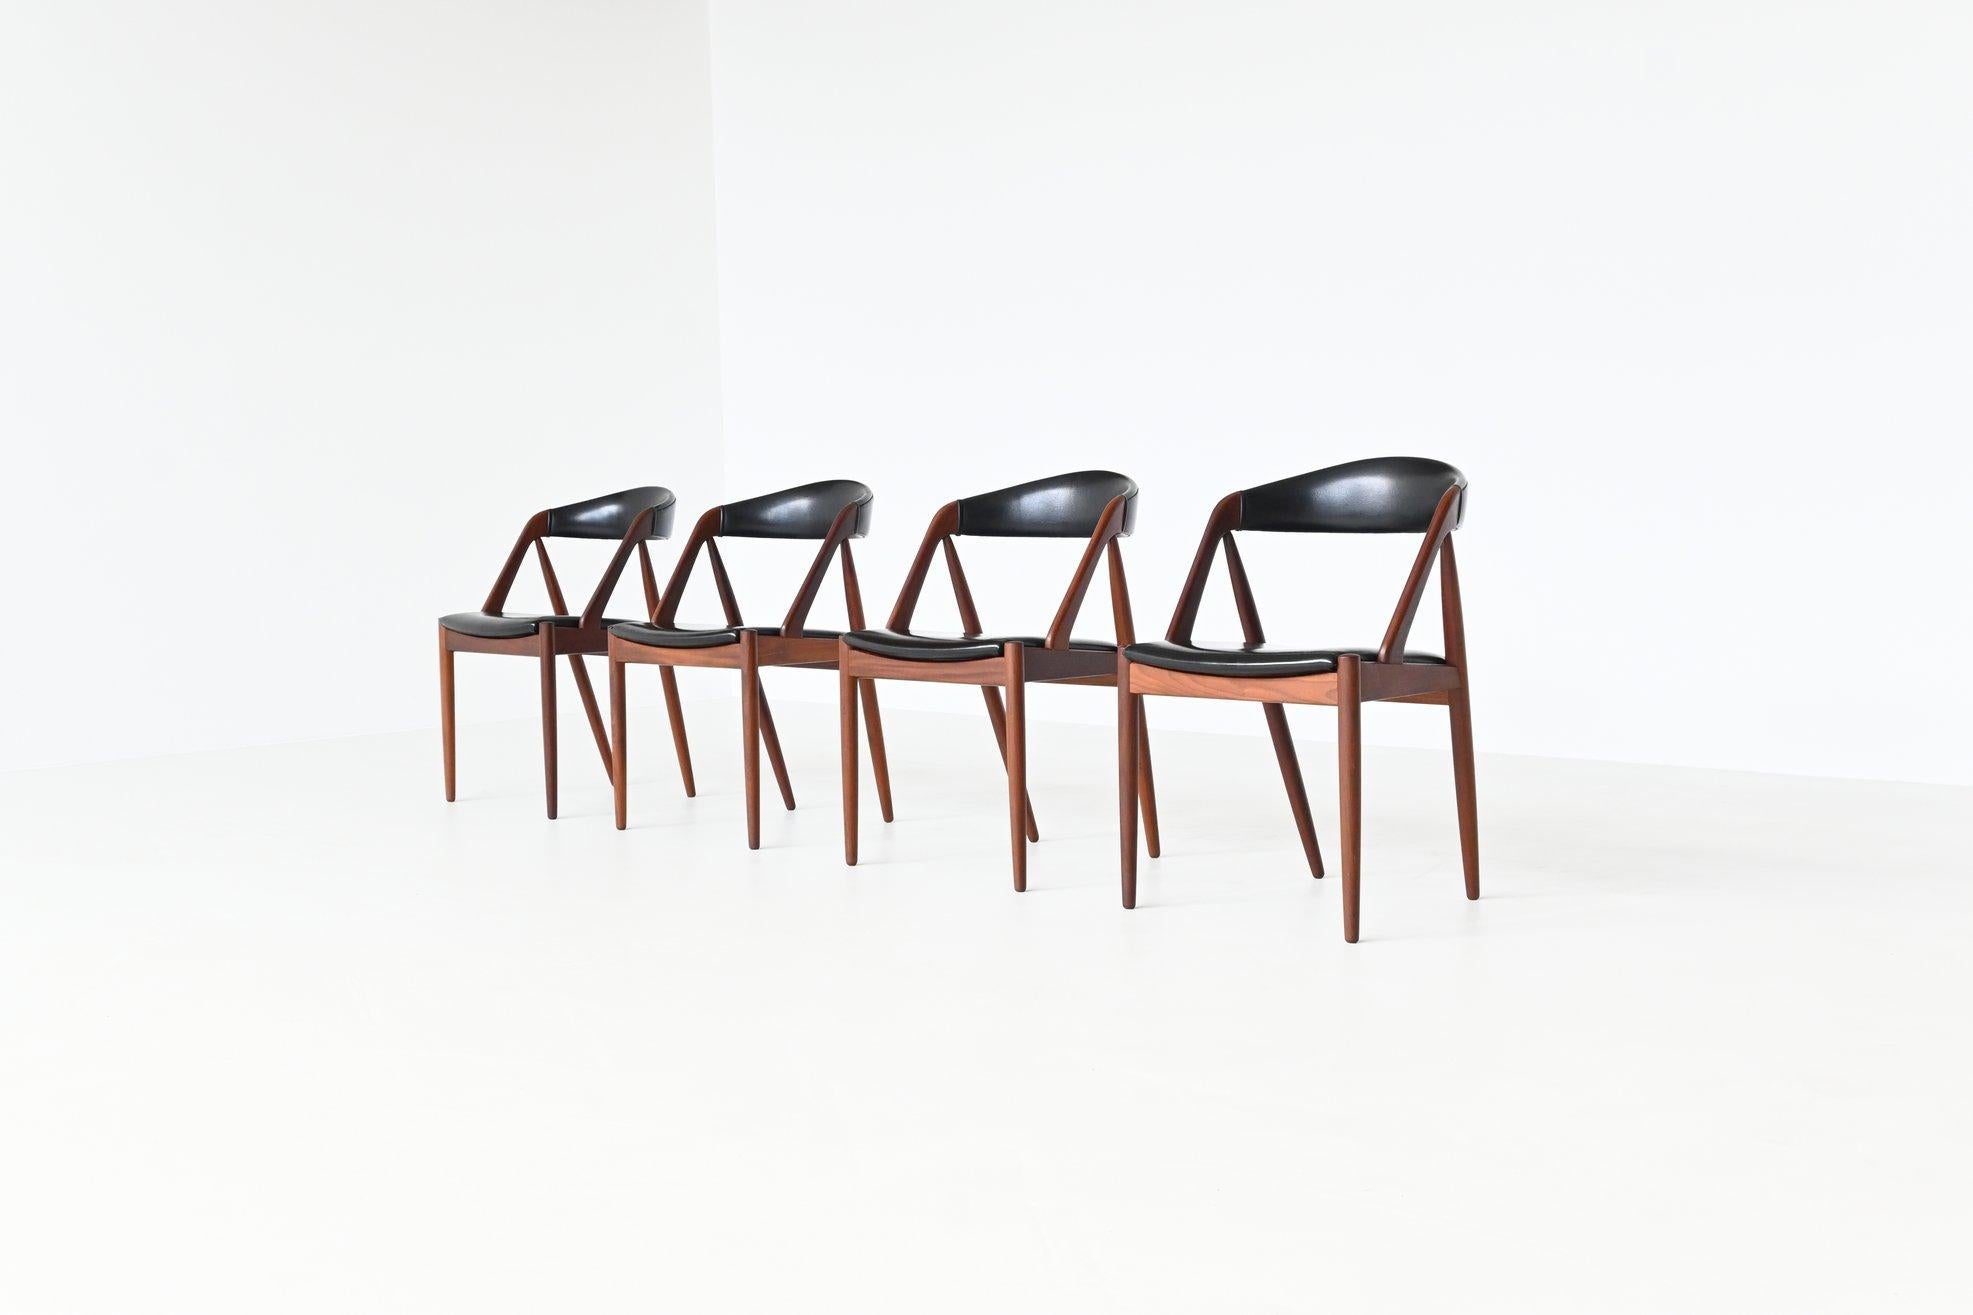 Beautiful shaped and well-crafted set of four dining chairs model 31 designed by Kai Kristiansen and manufactured by Schou Andersen Møbelfabrik, Denmark 1960. The frames are made of solid teak wood with curved backrest, crooked angles and straight